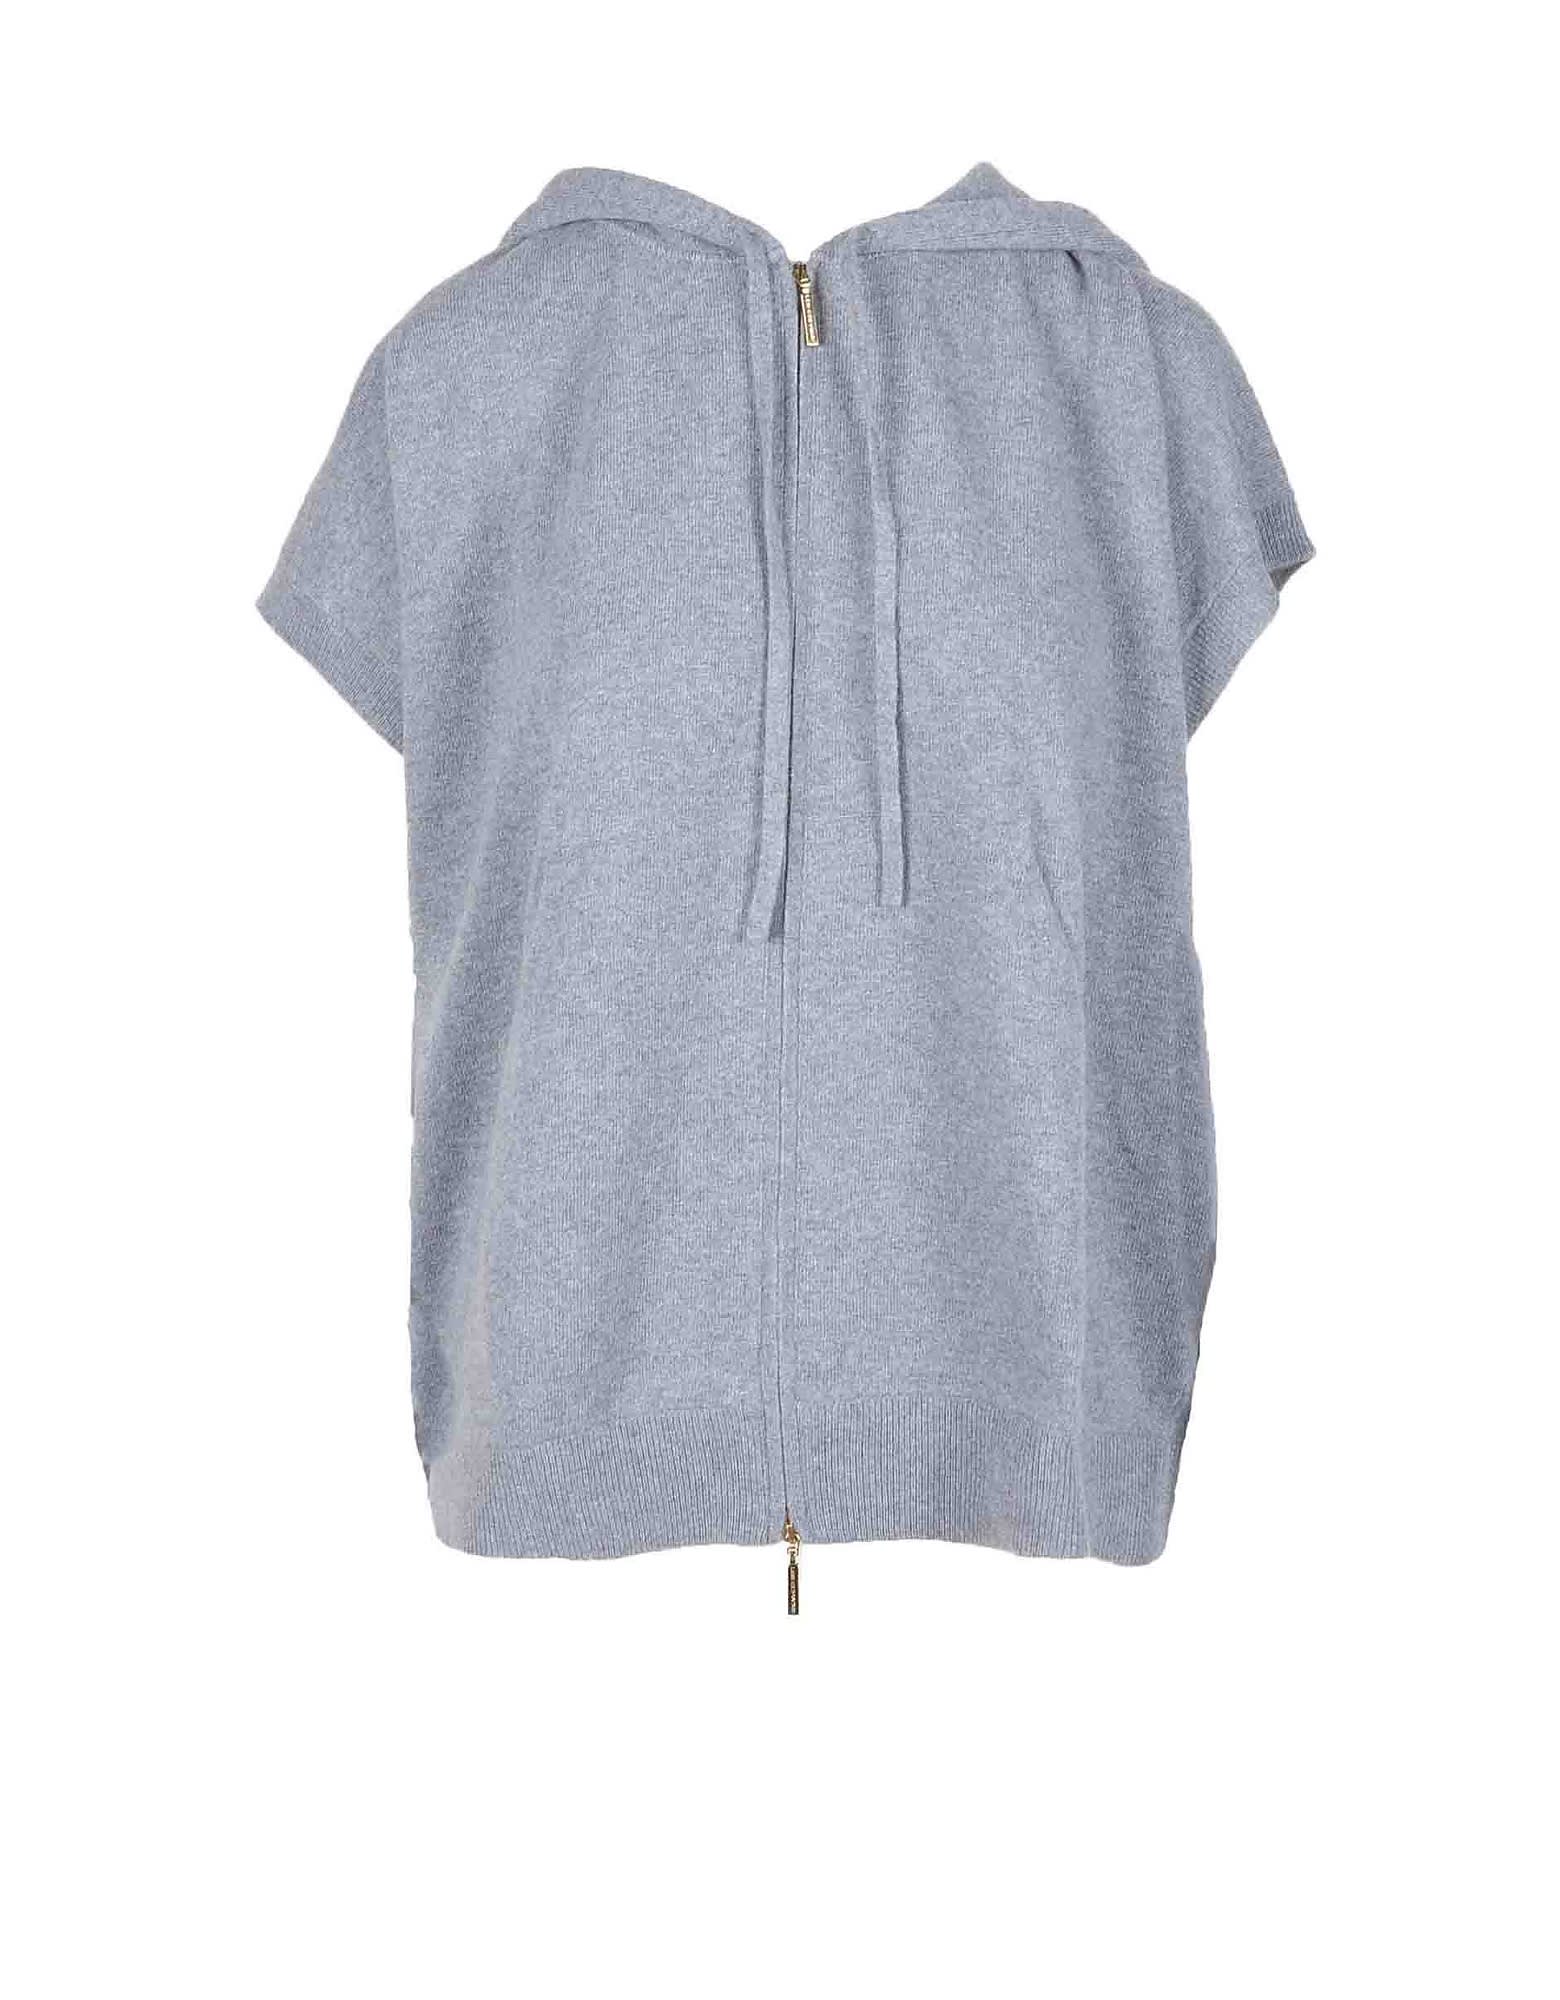 Les Copains Womens Gray Sweater